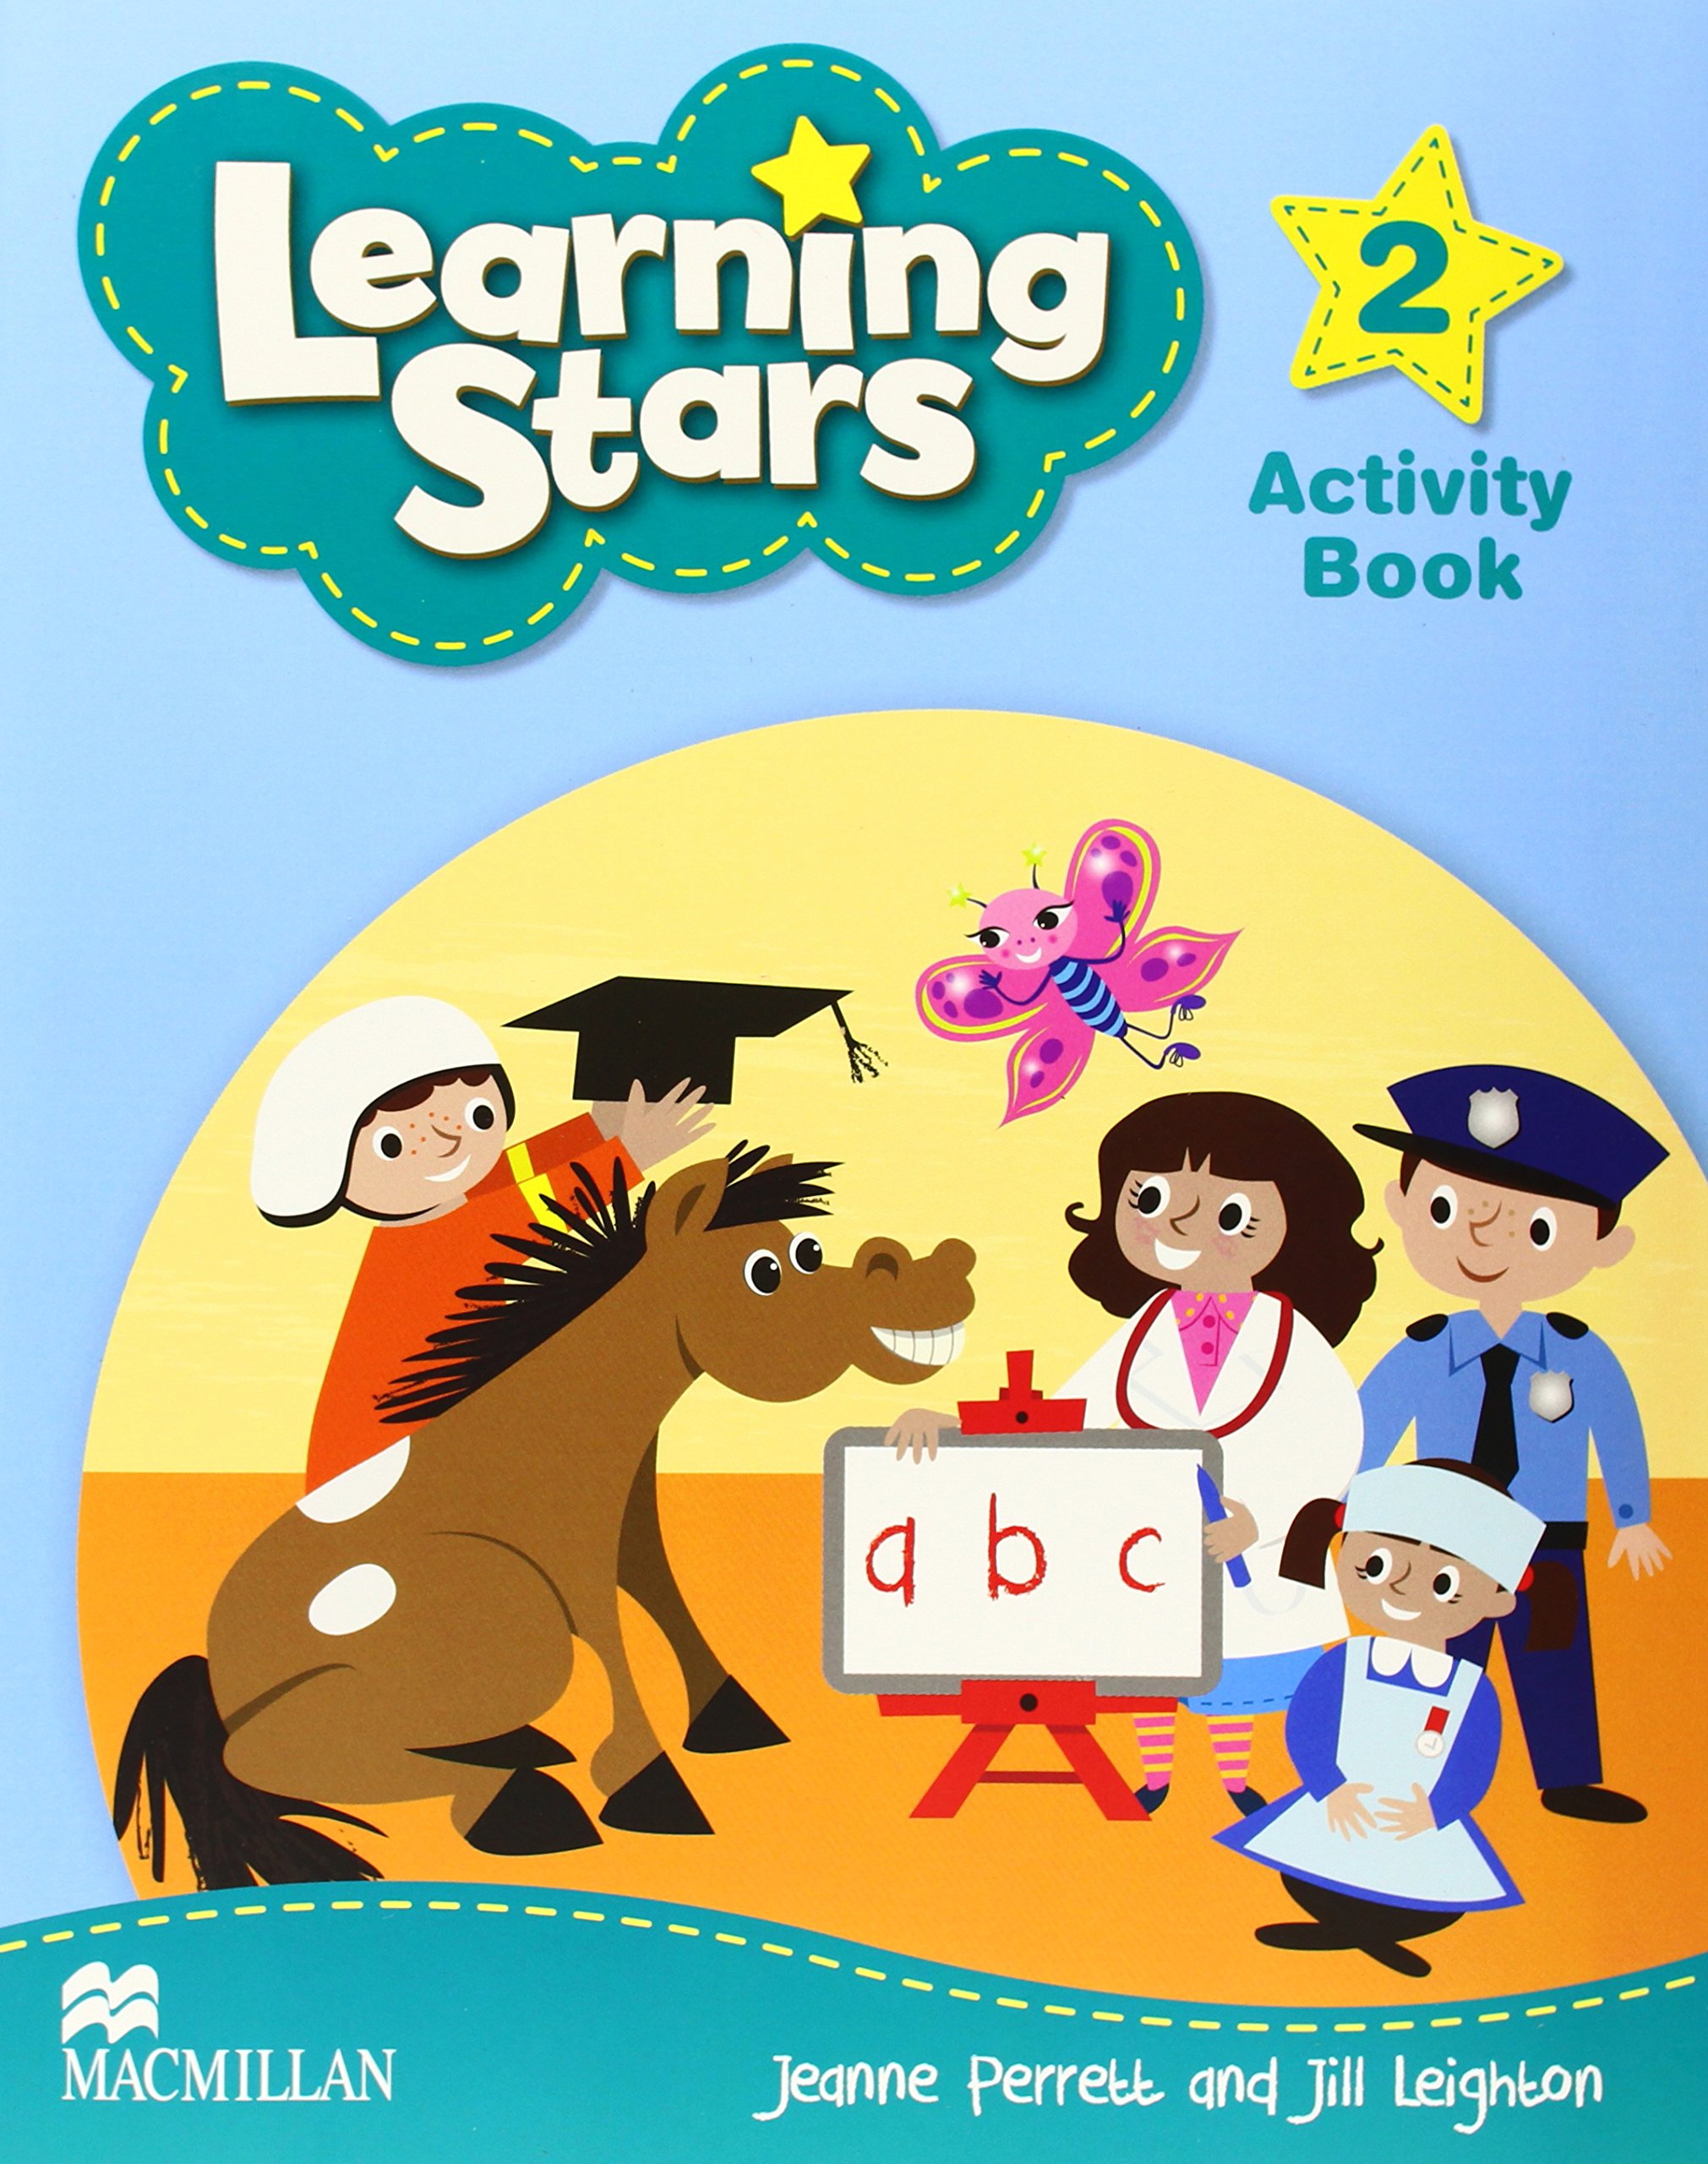 LEARNING STARS 2 Activity Book